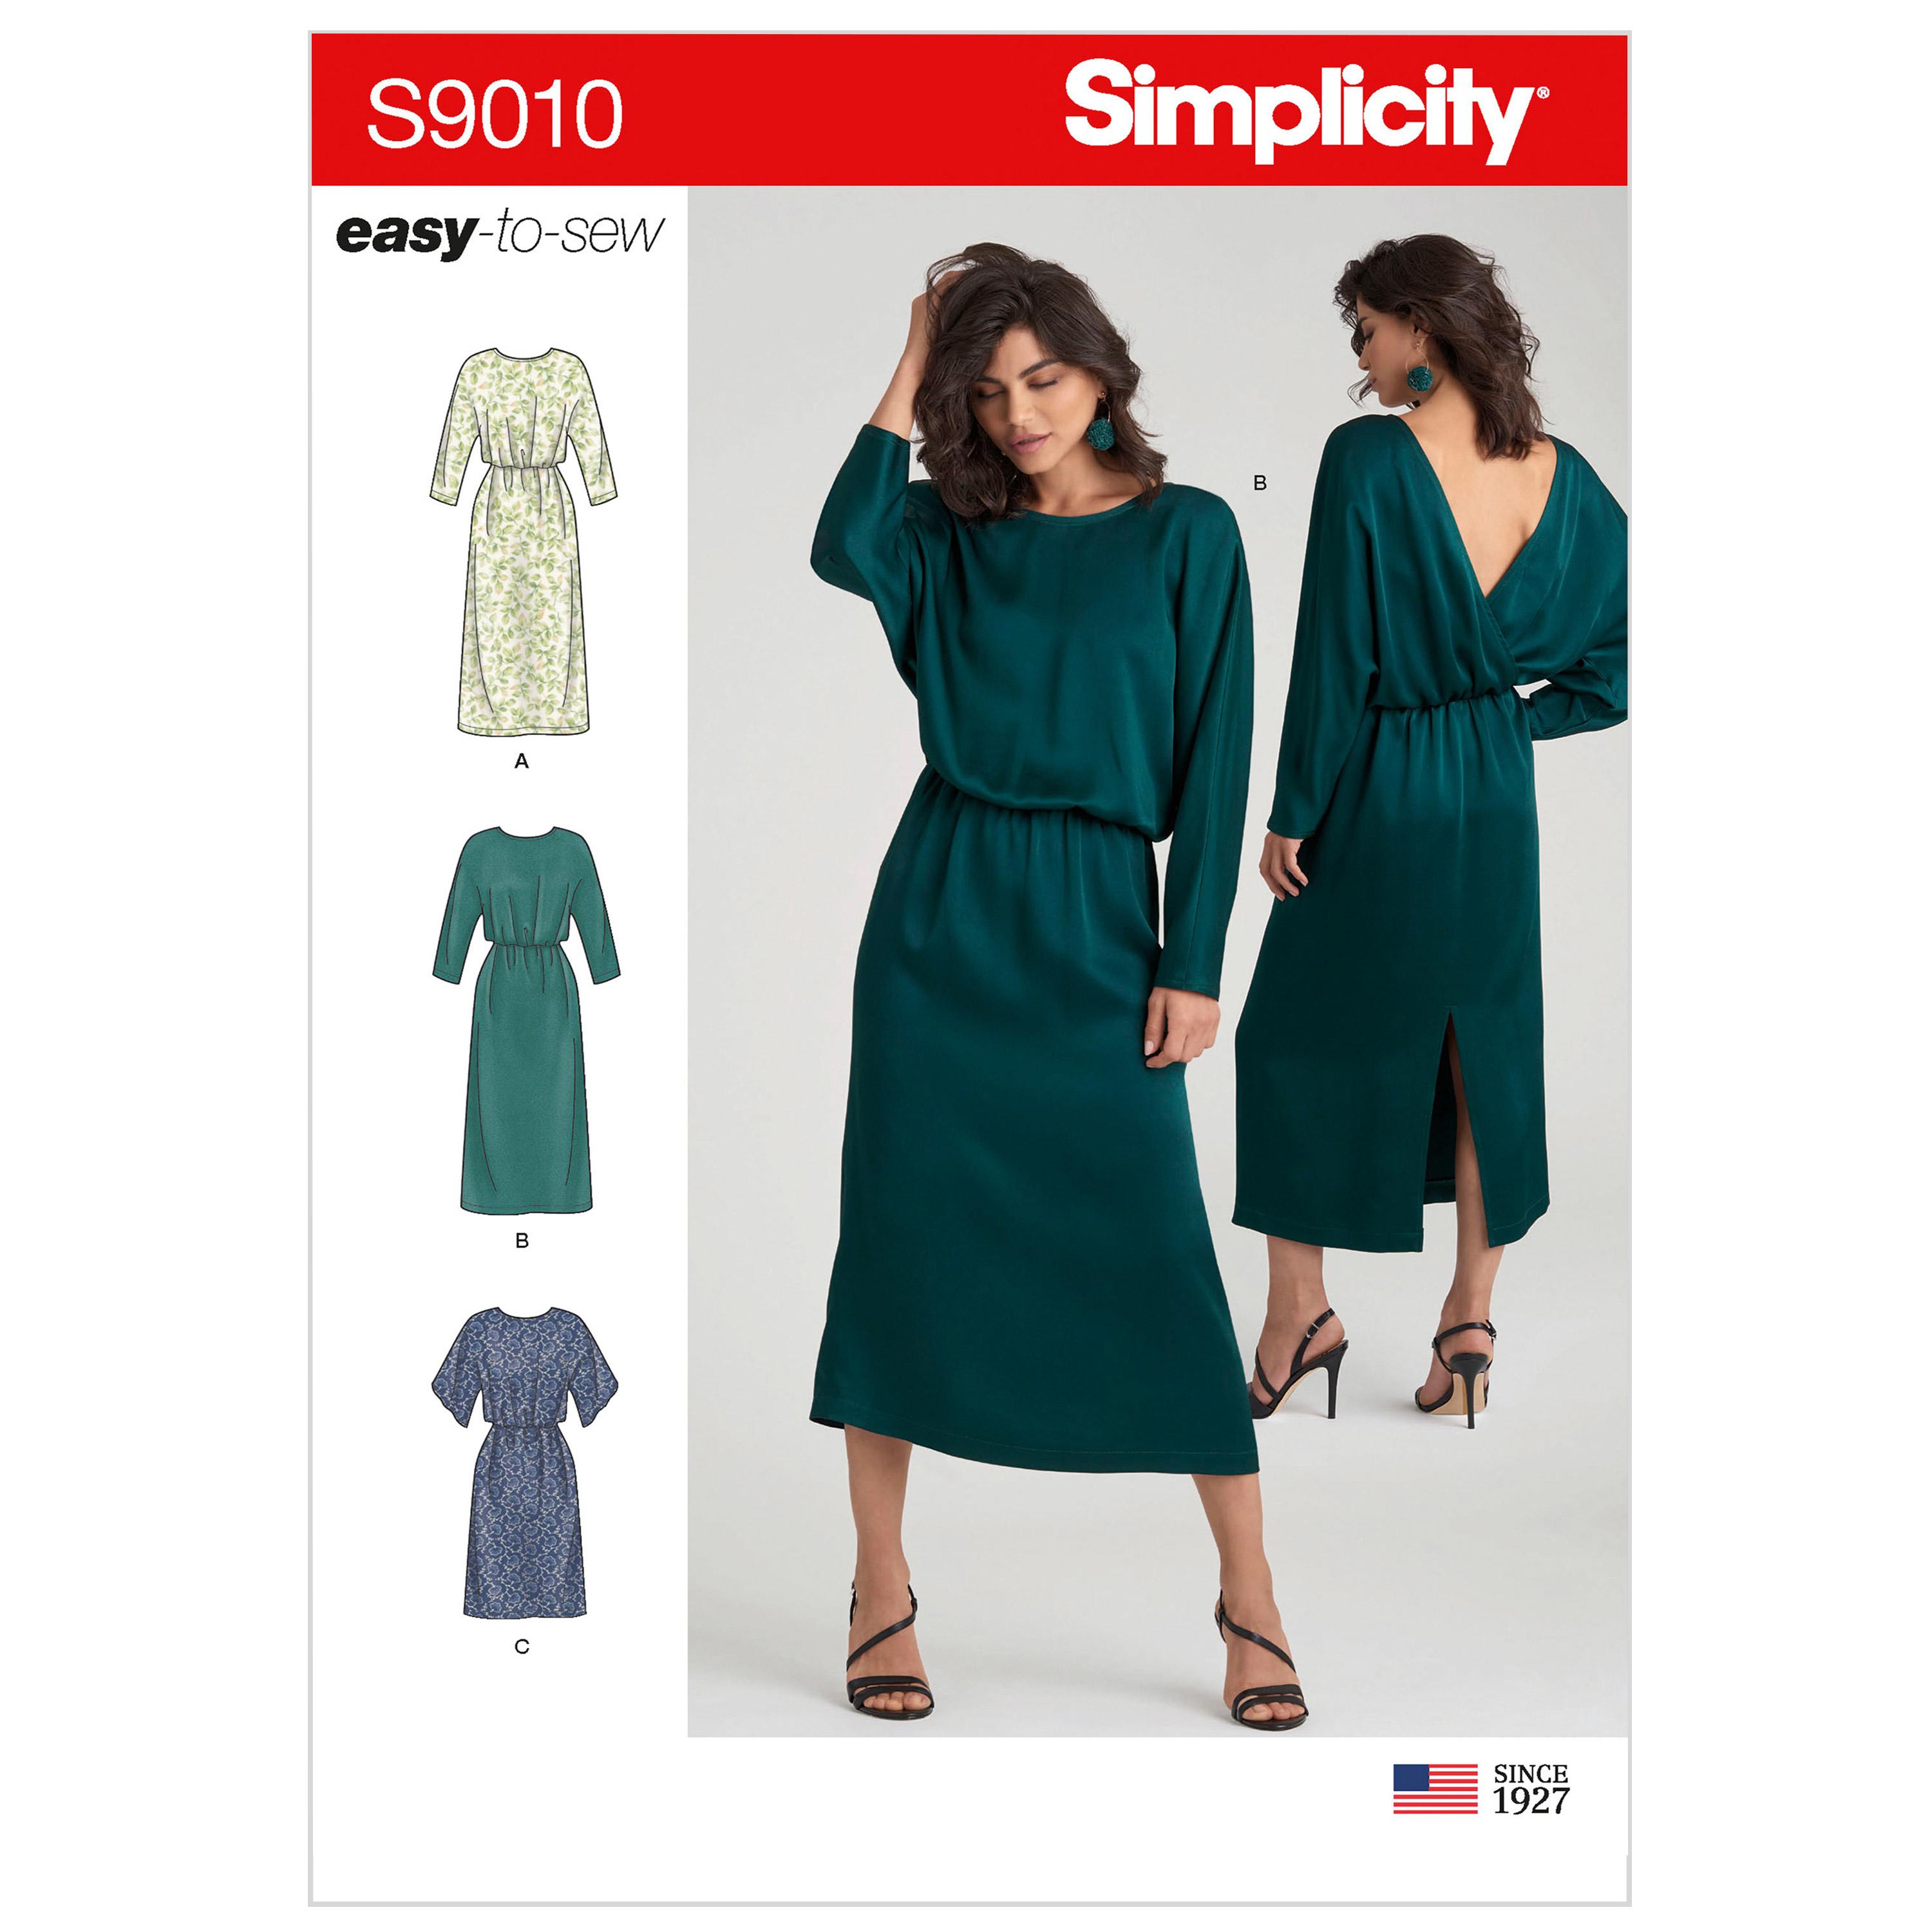 Simplicity S9010 Misses' Dresses with Length Variation